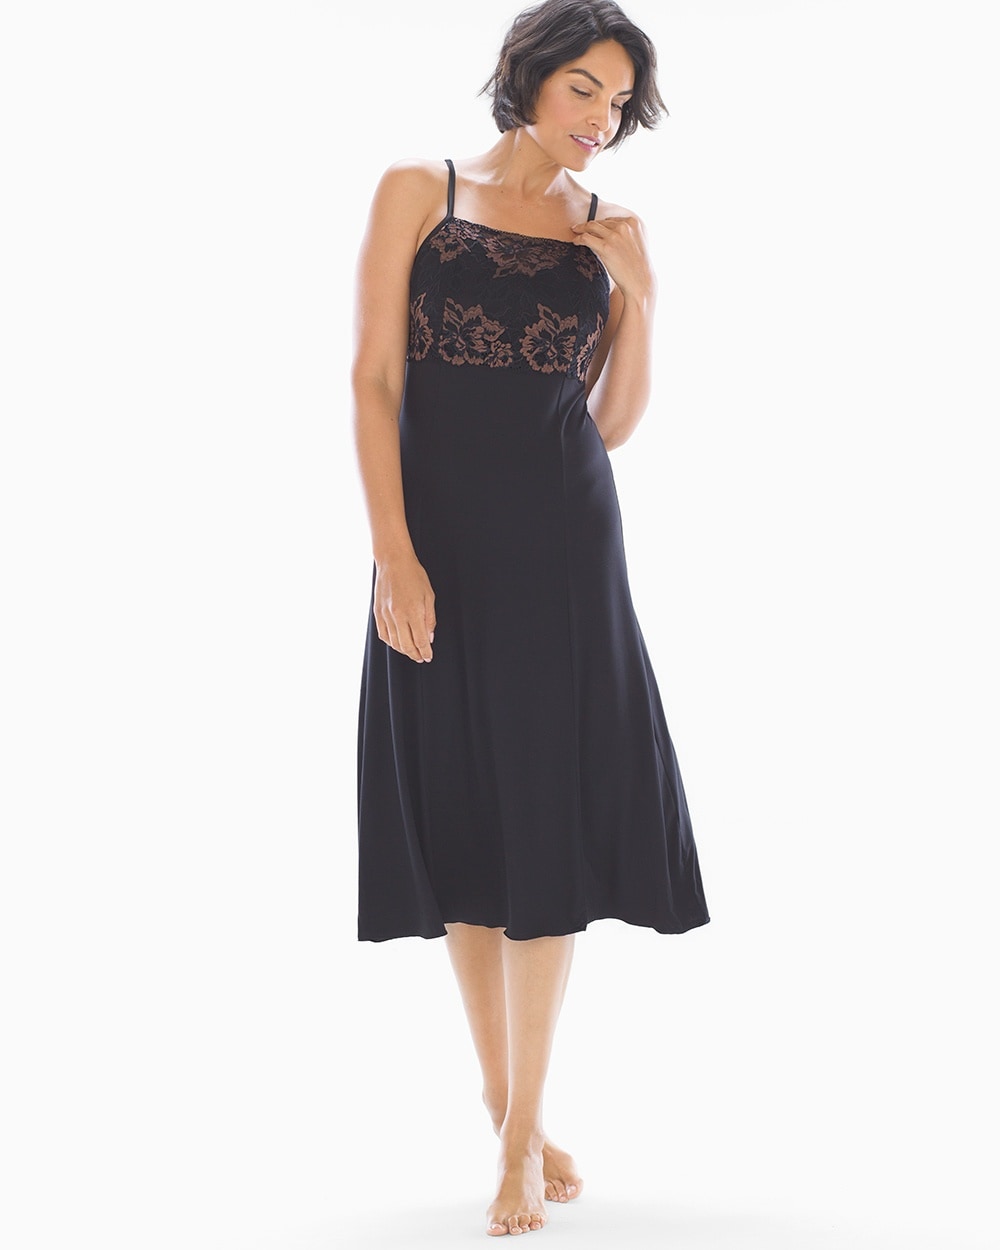 Cool Nights High Neck Nightgown with Lace Black